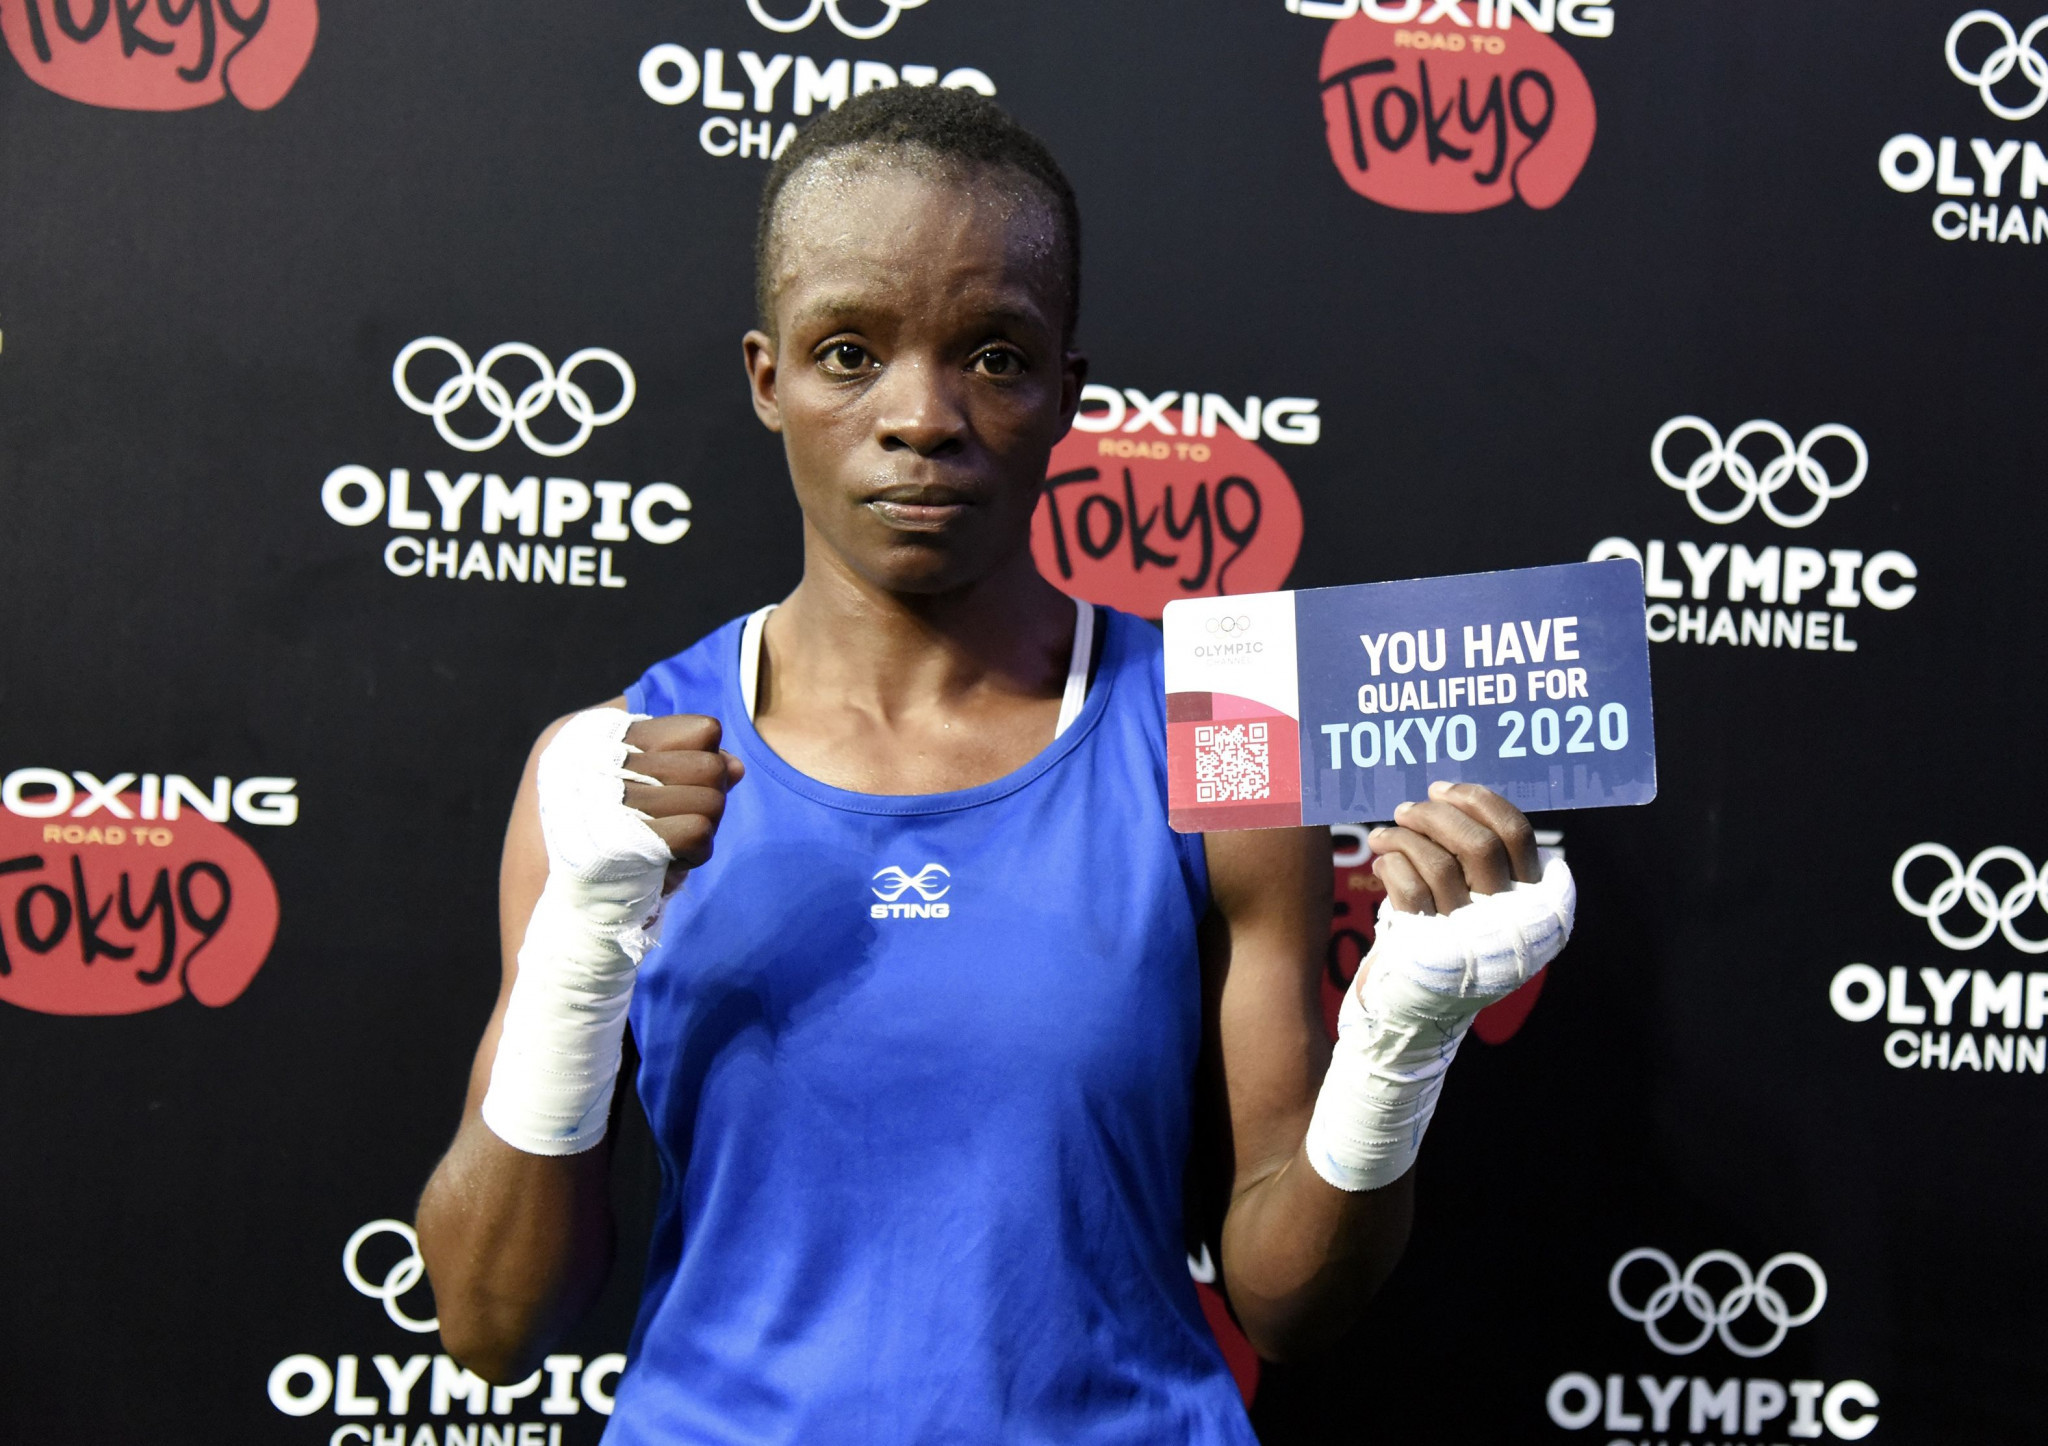 Kenyan boxing coach thanks NOC for support on road to Tokyo 2020